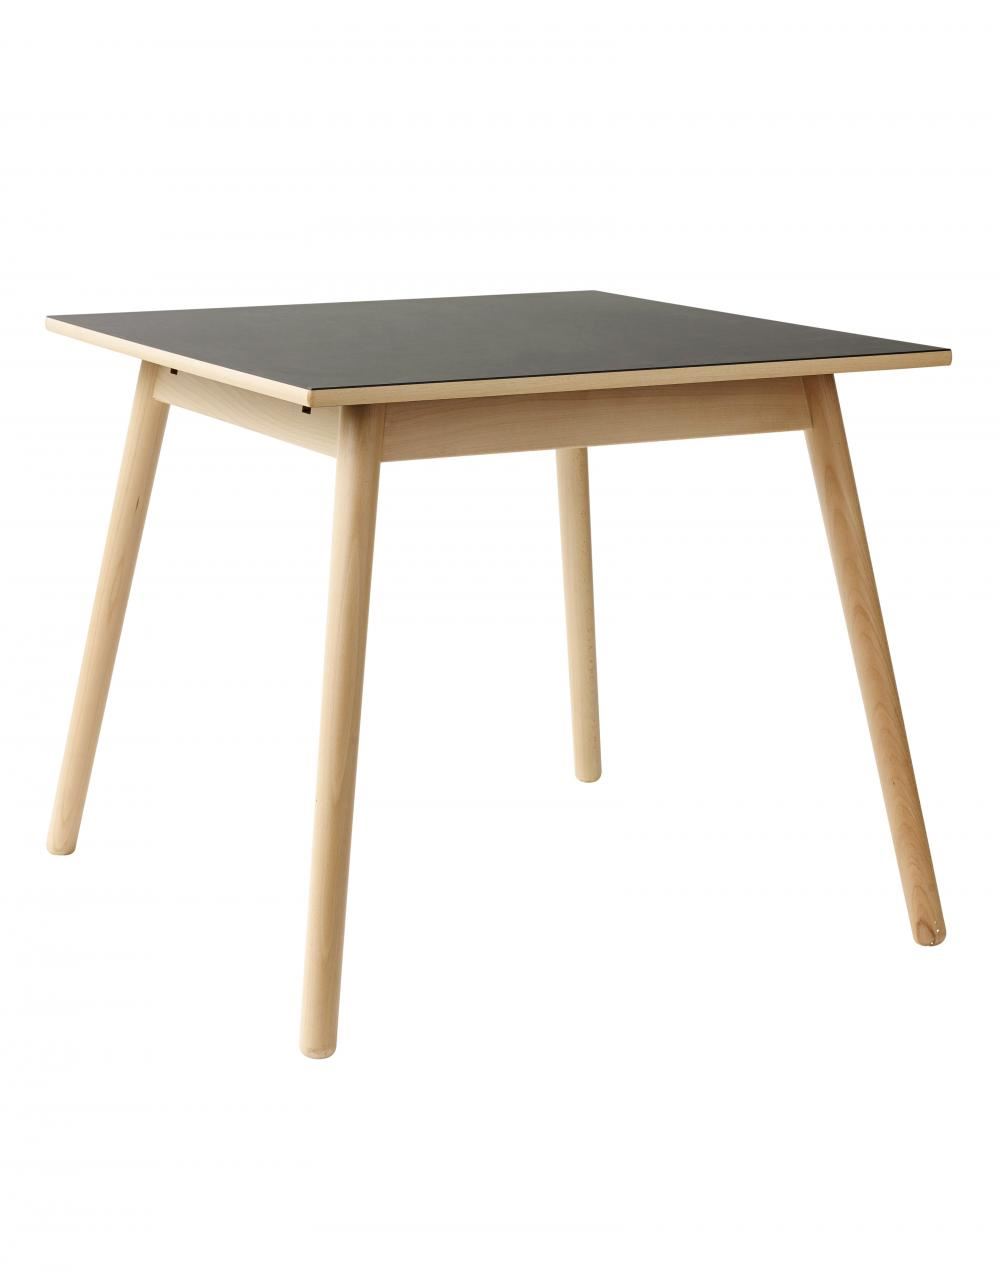 C35 Dining Table Small Medium Small Beech With Black Lino Top Beech With Black Lino Top